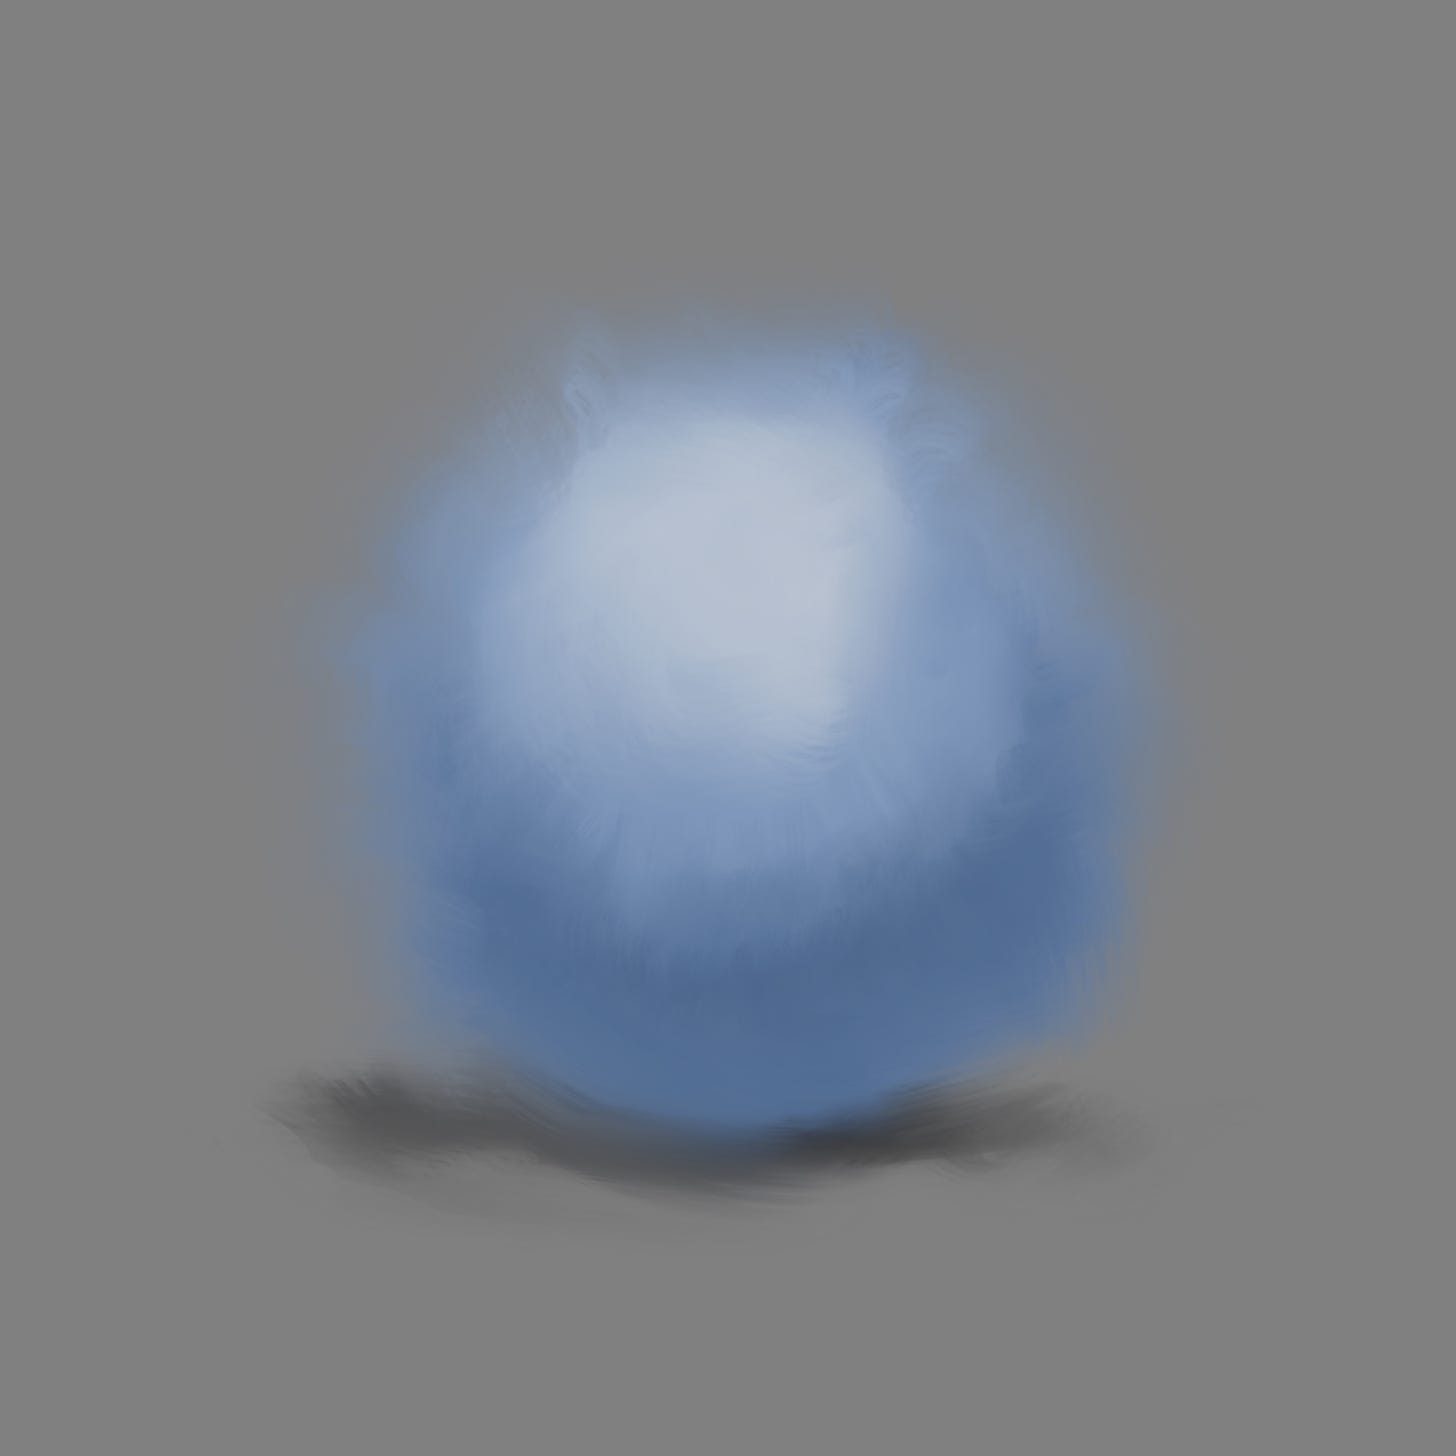 Quick painting of a blue sphere with blurry edges, like a round cloud